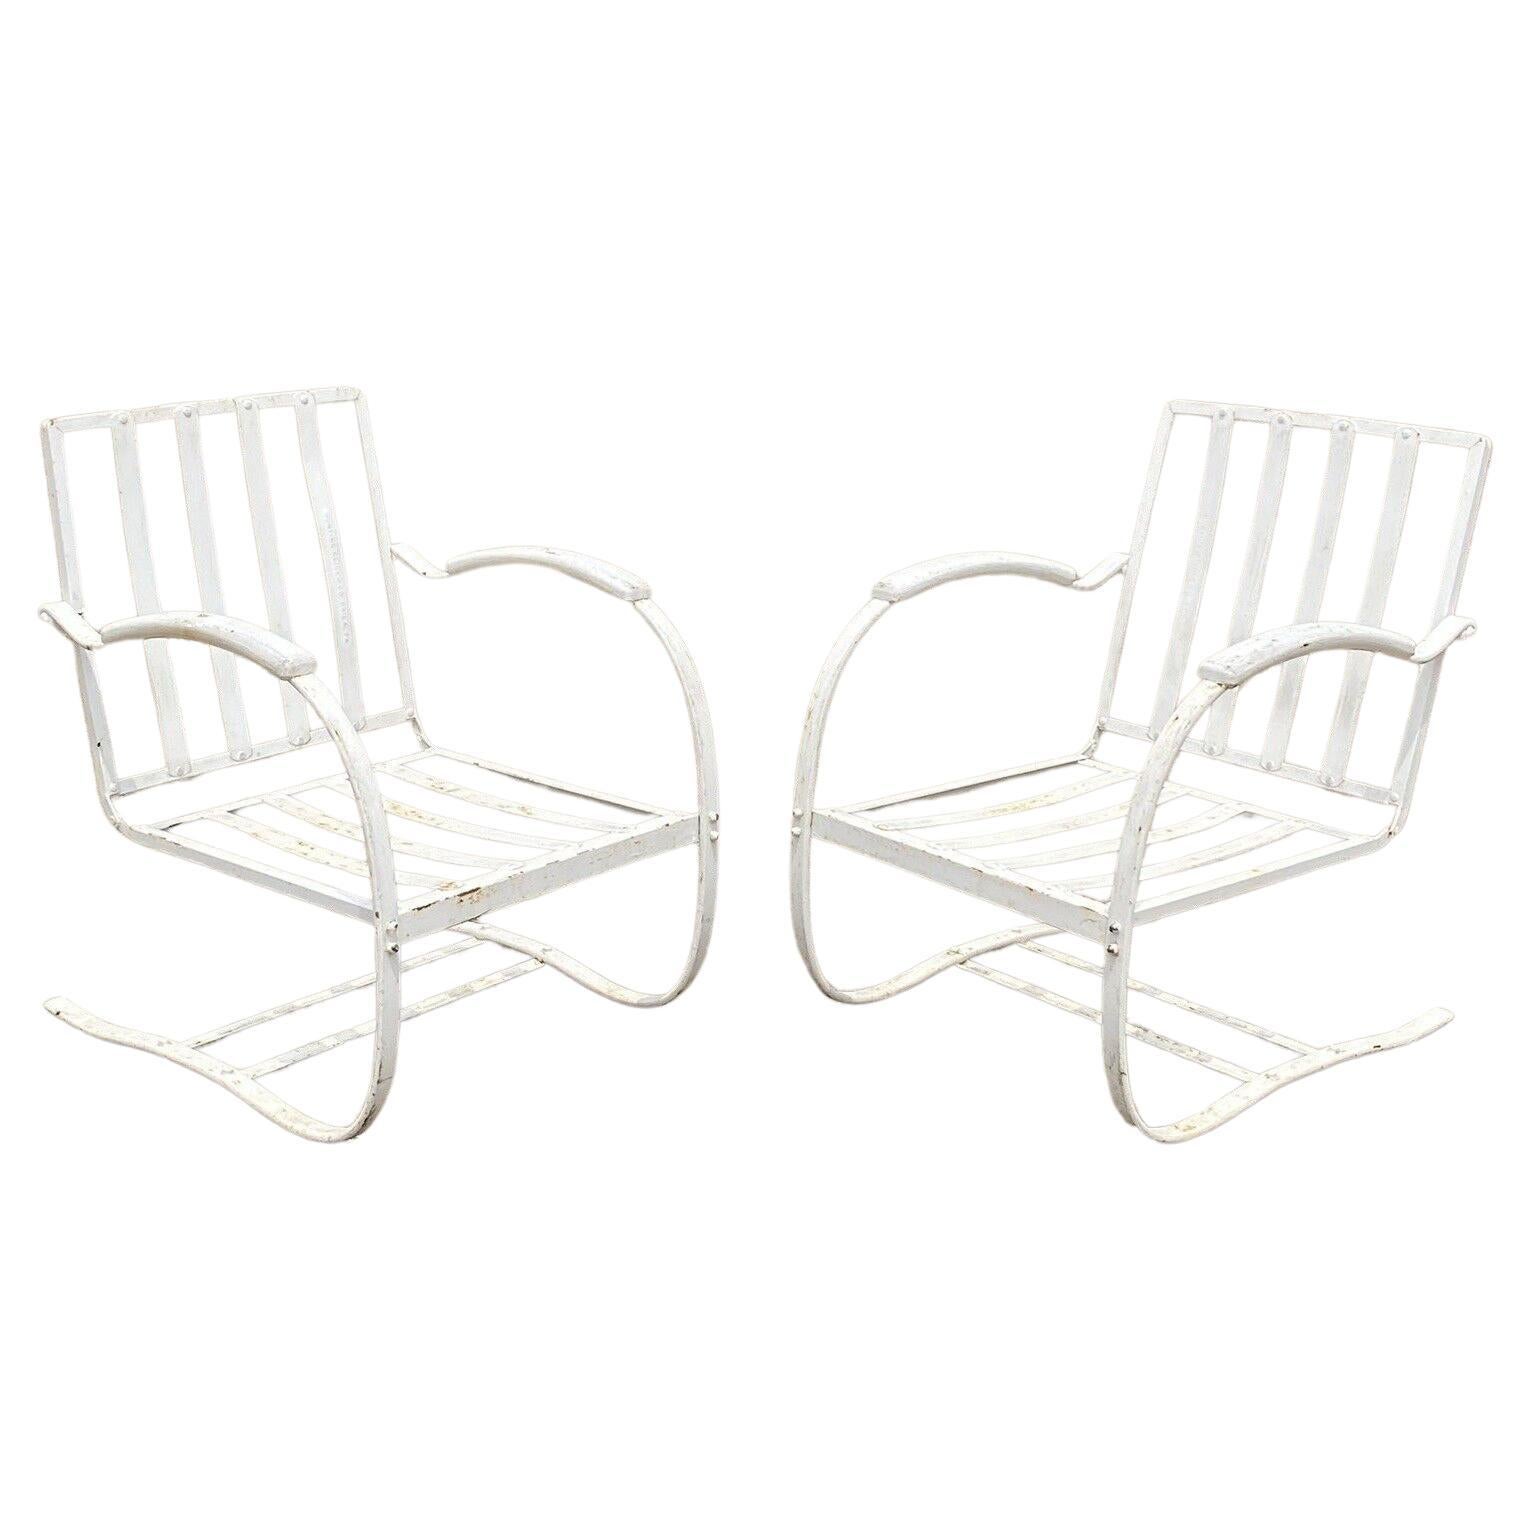 Pair Bunting Glider Co Art Deco White Iron Outdoor Patio Springer Lounge Chair